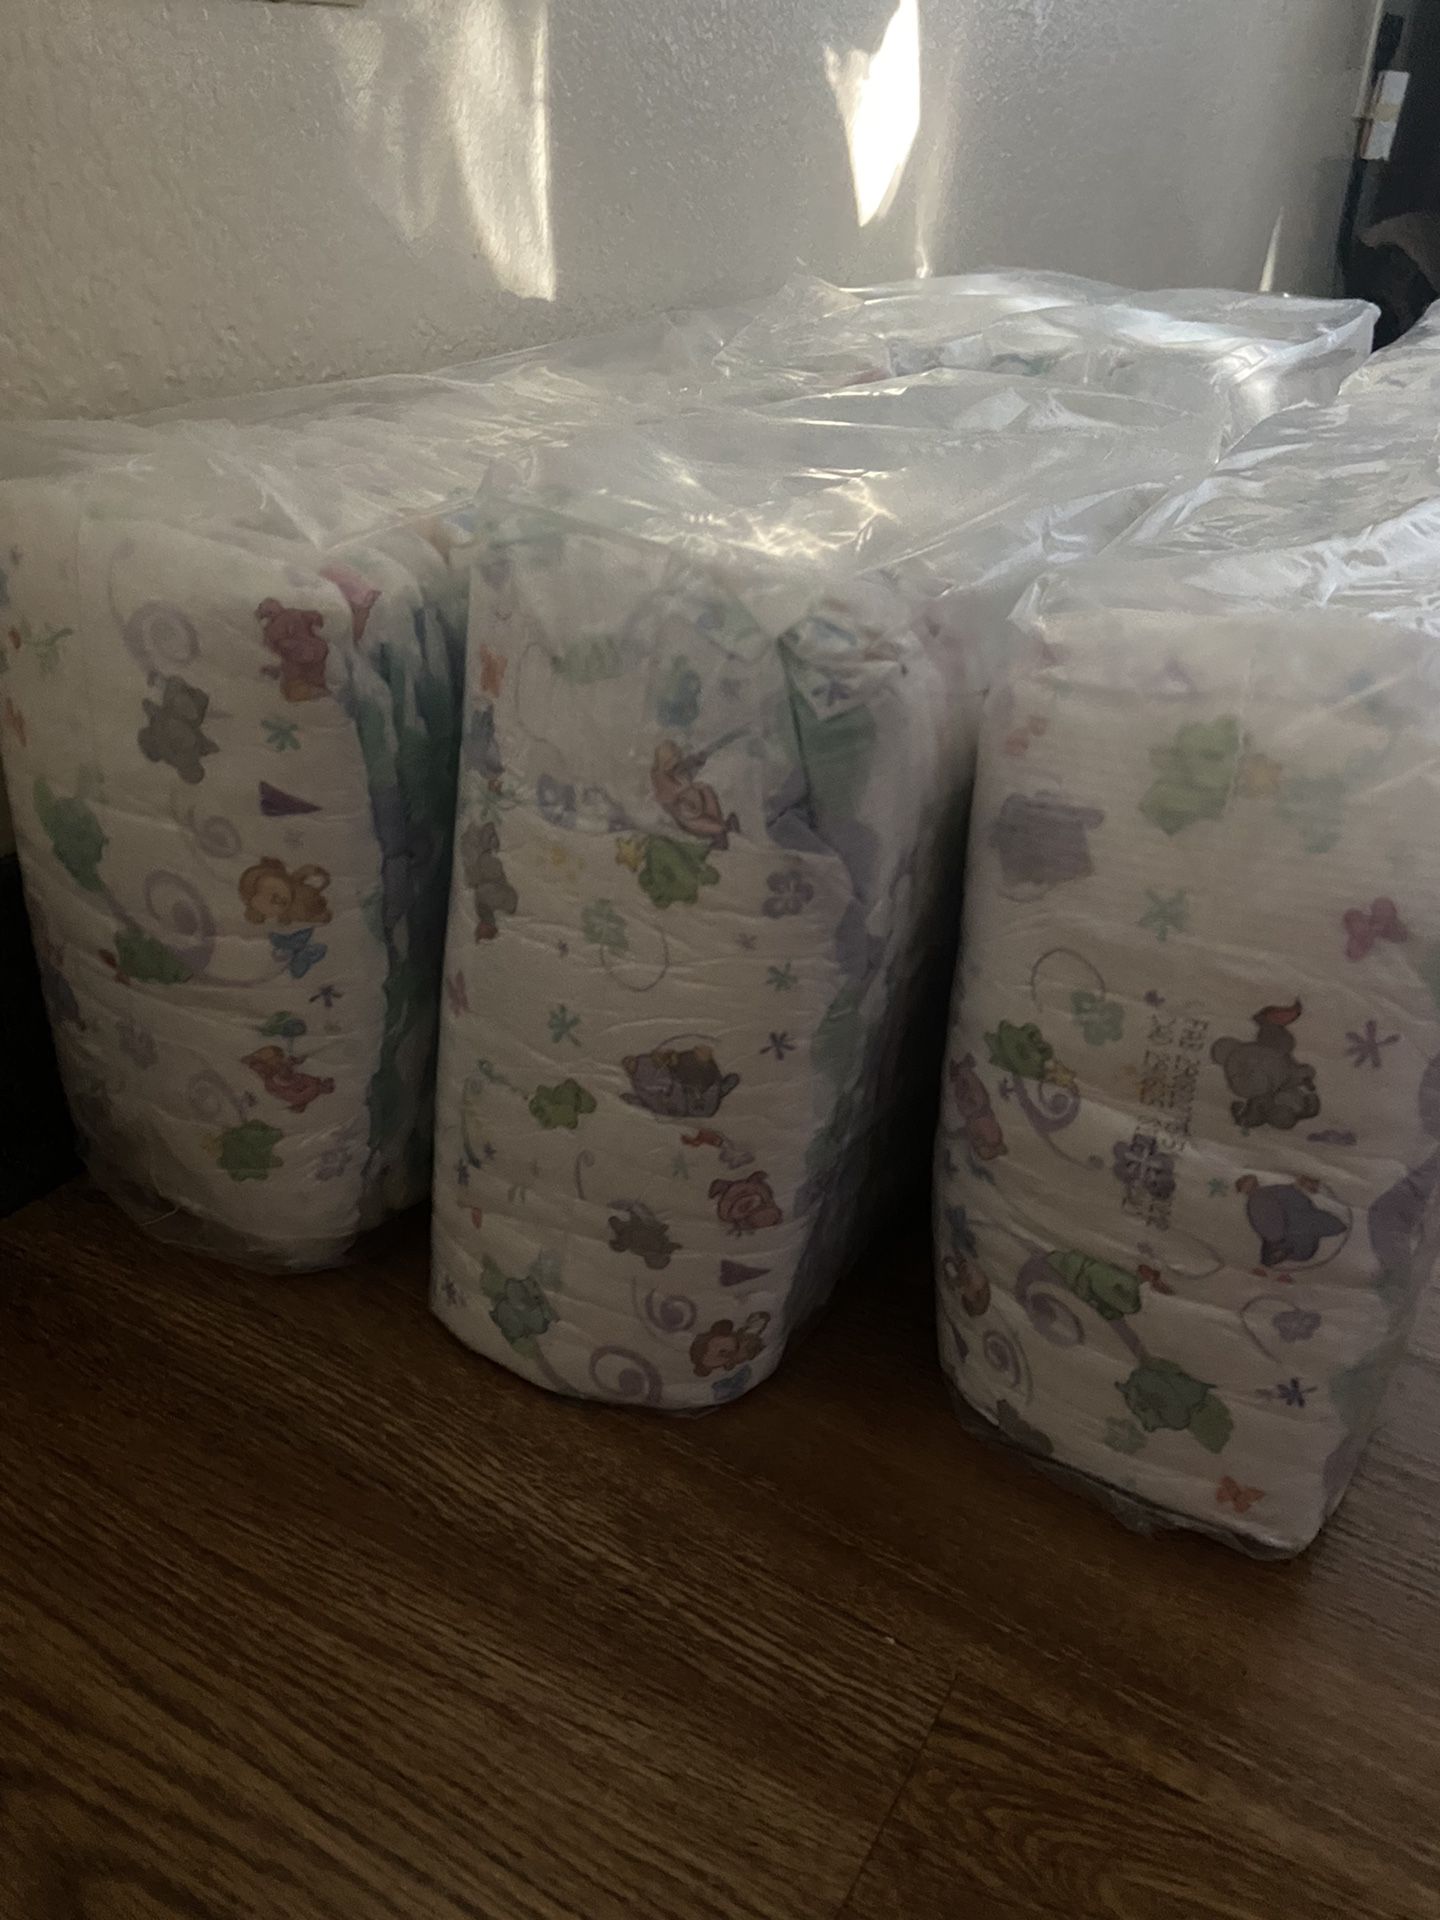 Diapers Size 6 